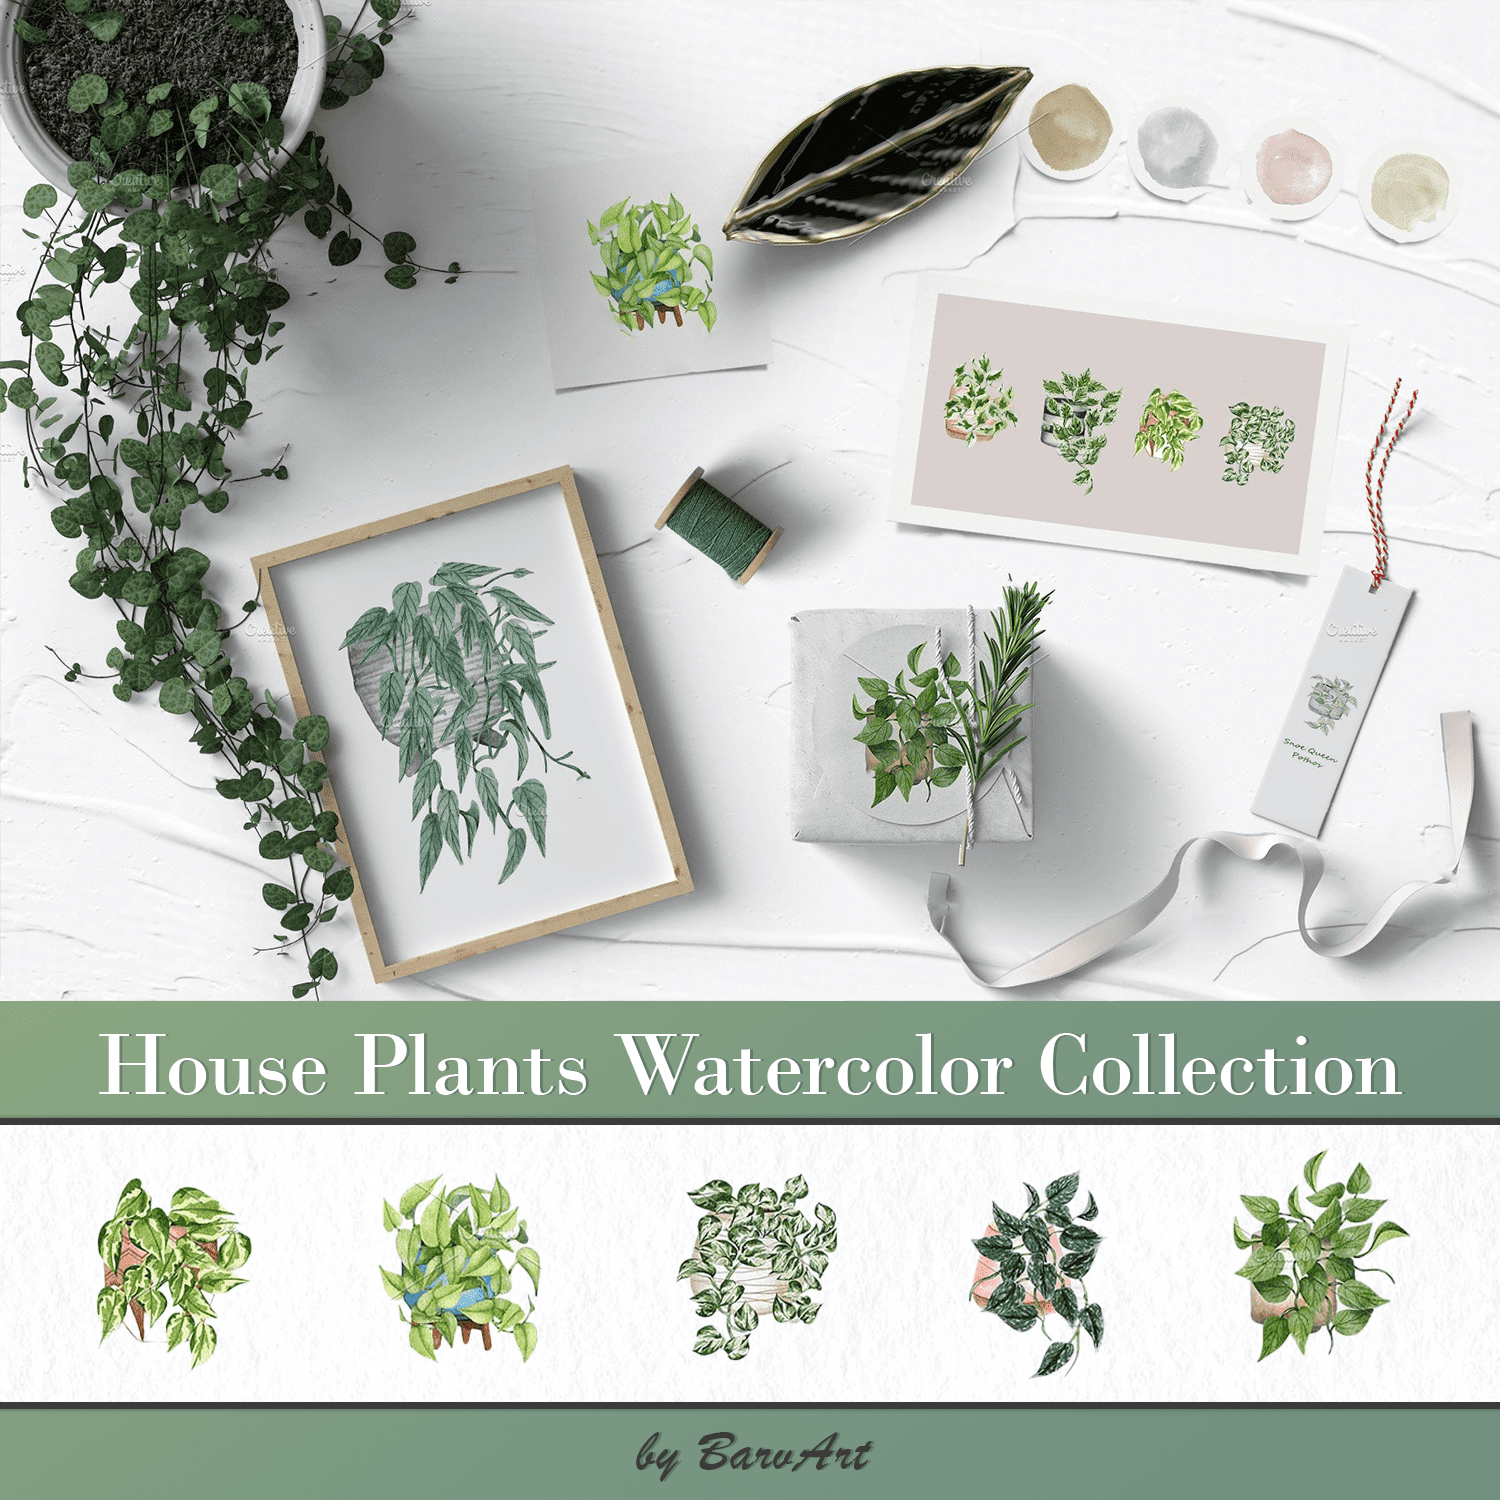 House Plants Watercolor Collection.